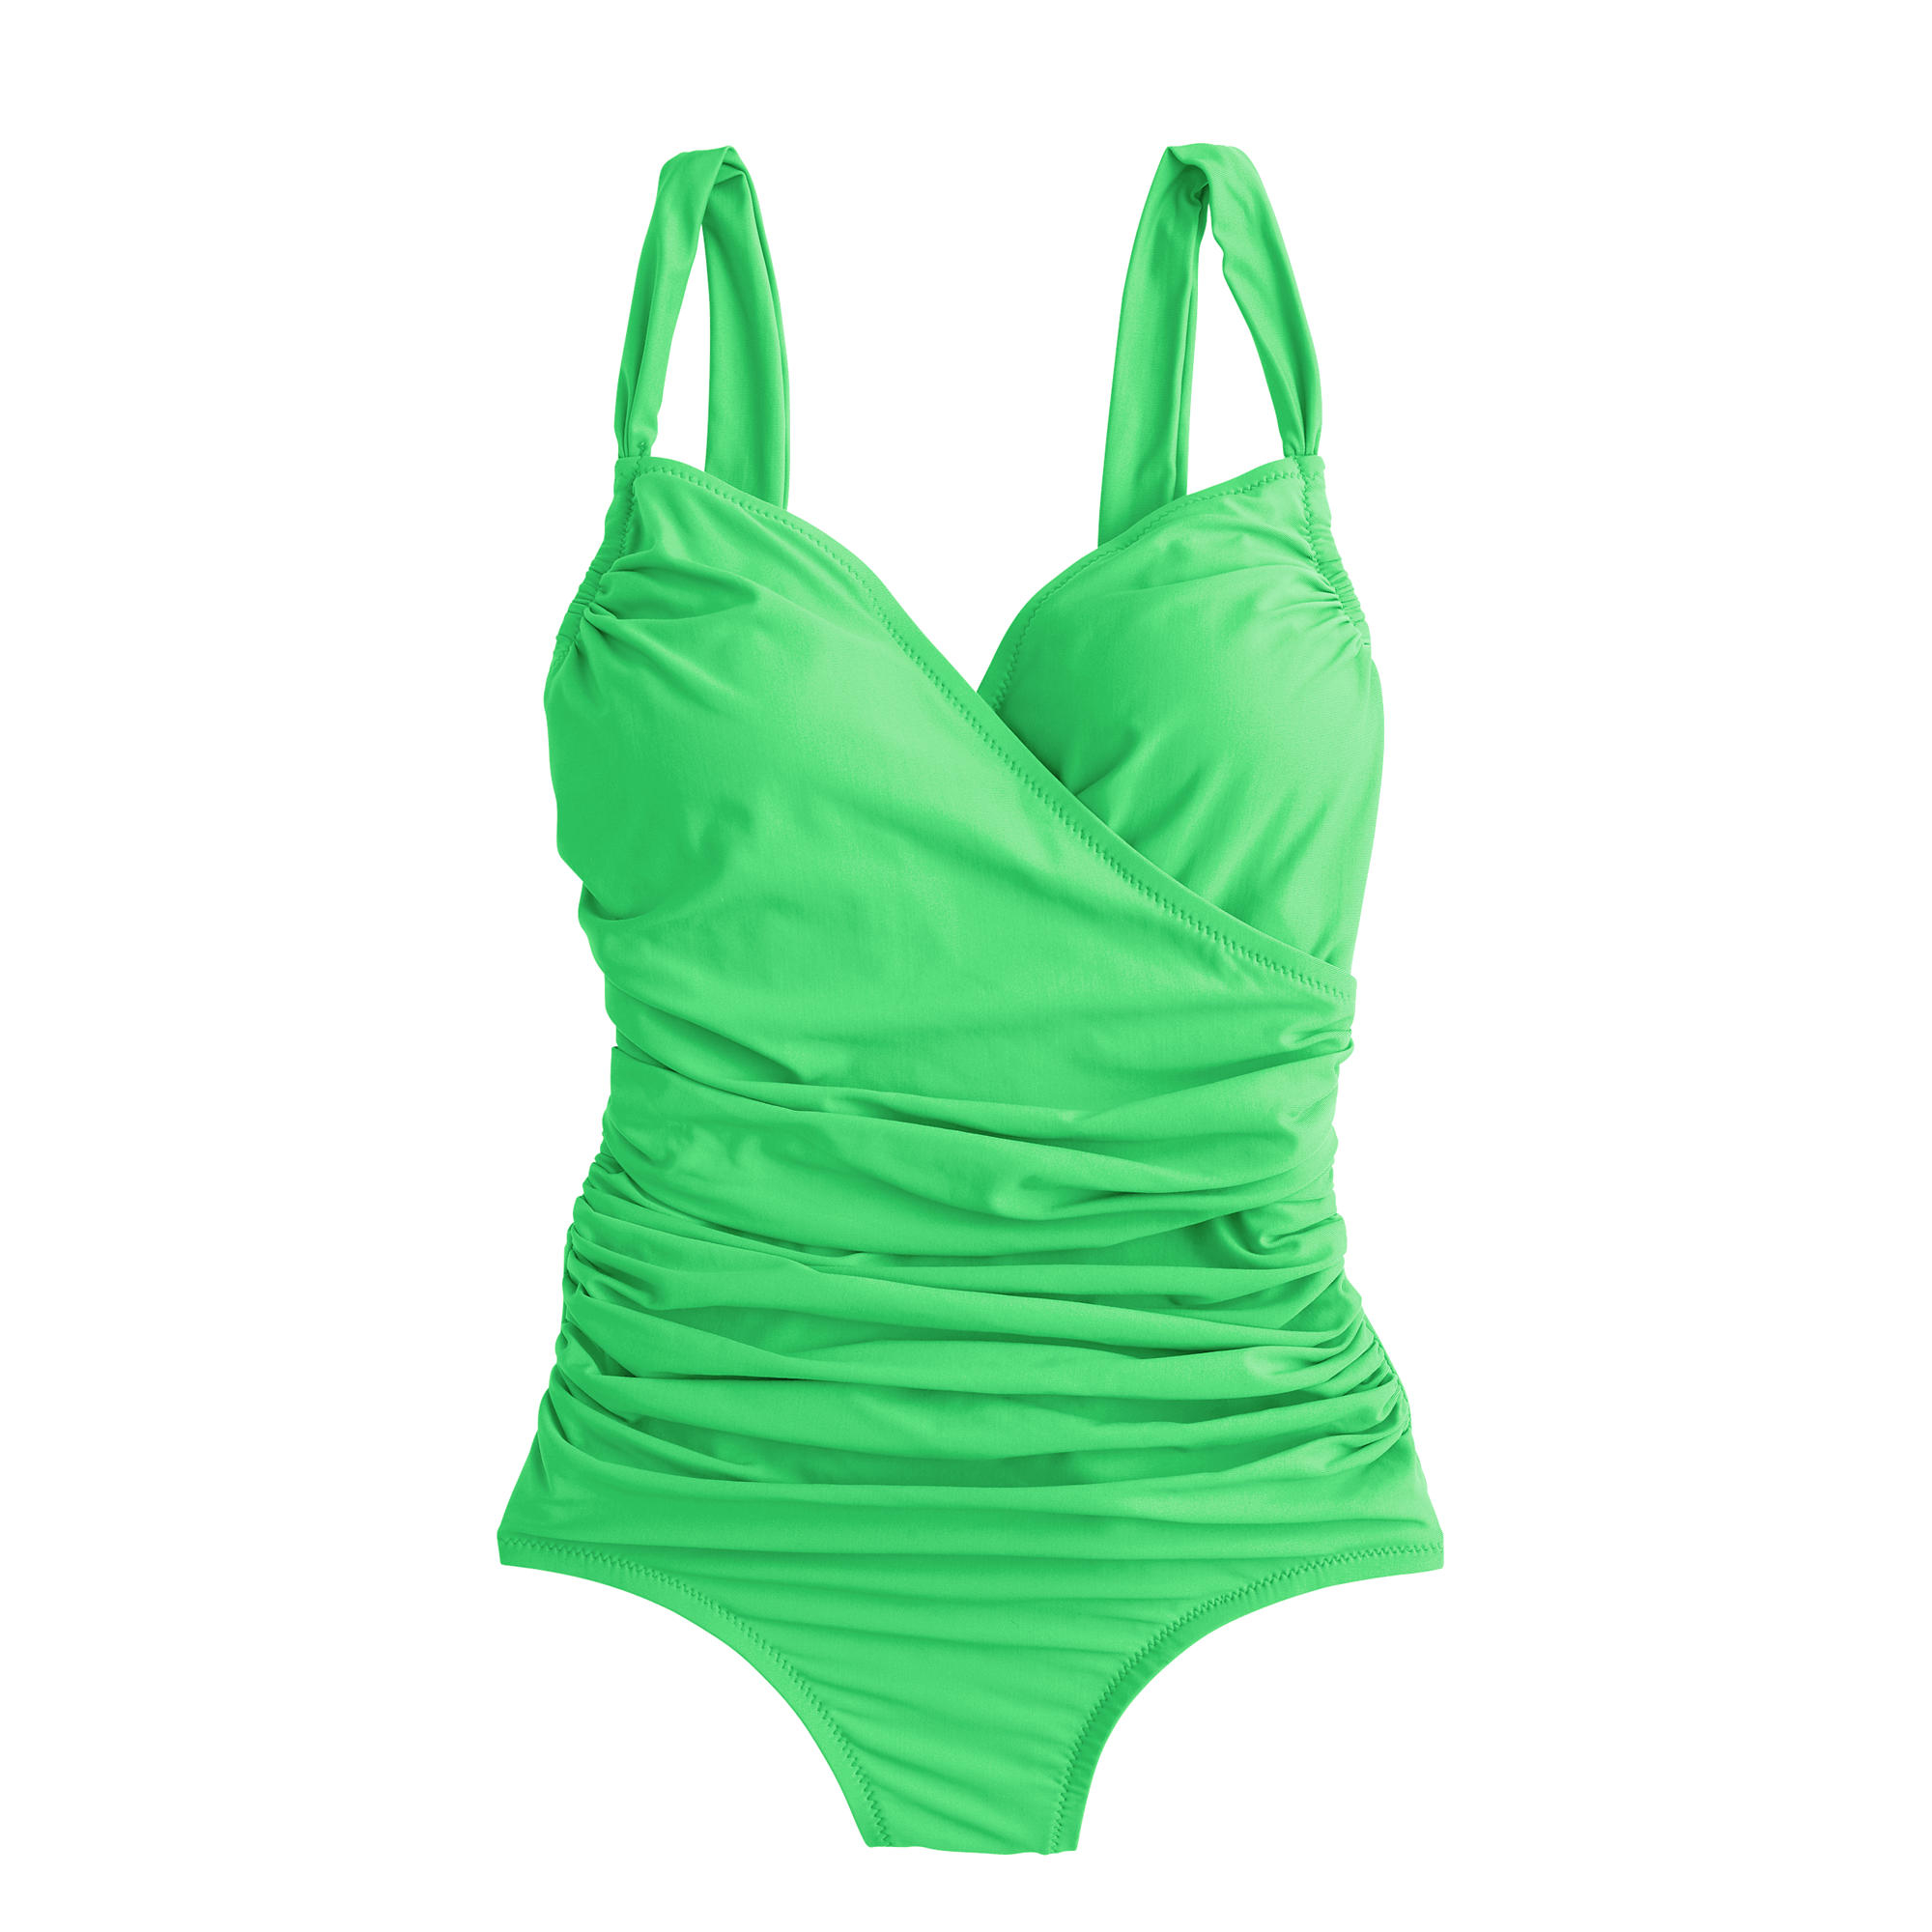 J.crew Ruched Wrap One-Piece Swimsuit in Green (neon seamist) | Lyst